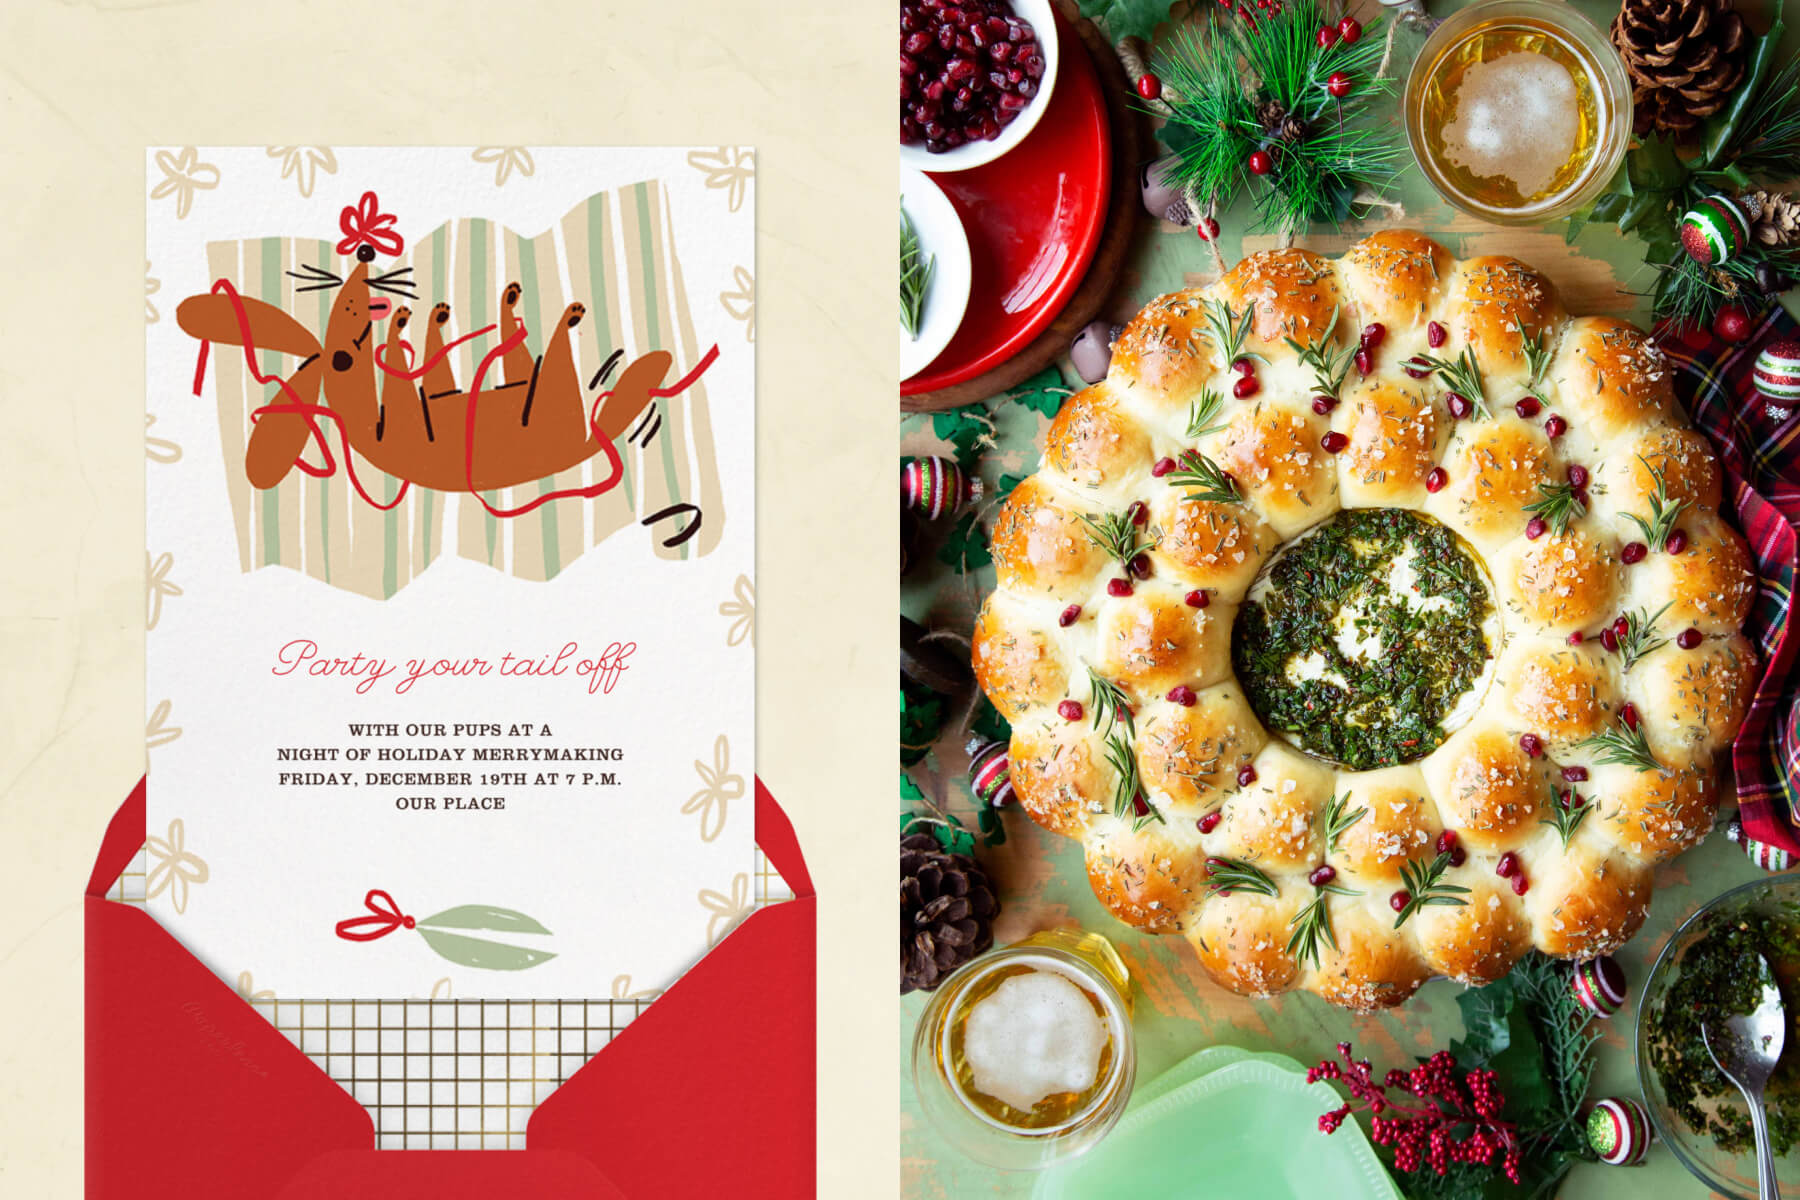 Left: A white invitation with an illustration of a brown dog tangled in wrapping paper and ribbon; right: an overhead photograph of a festive round bread with dip in the middle.